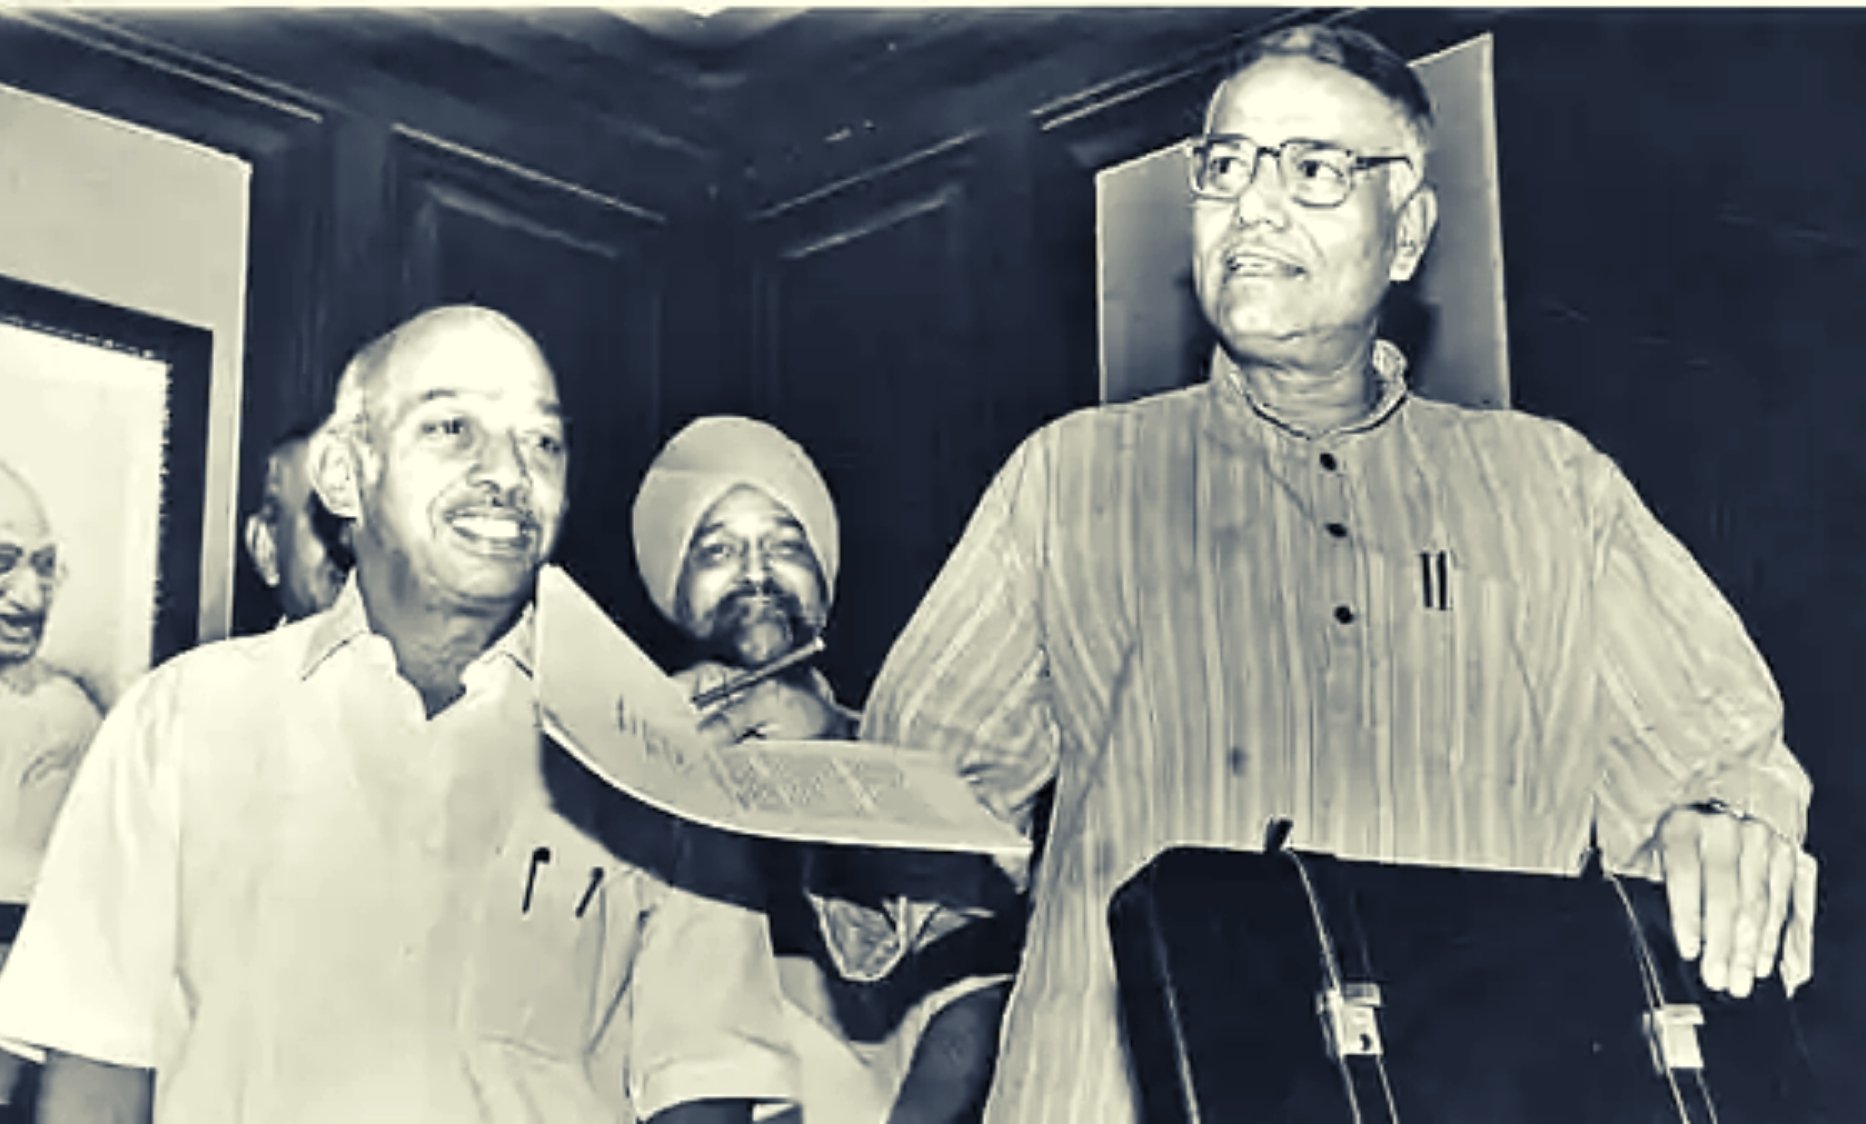 Fiscal Responsibility and Budget Management Bill in the Parliament in December 2000 introduced by Yashwant Sinha